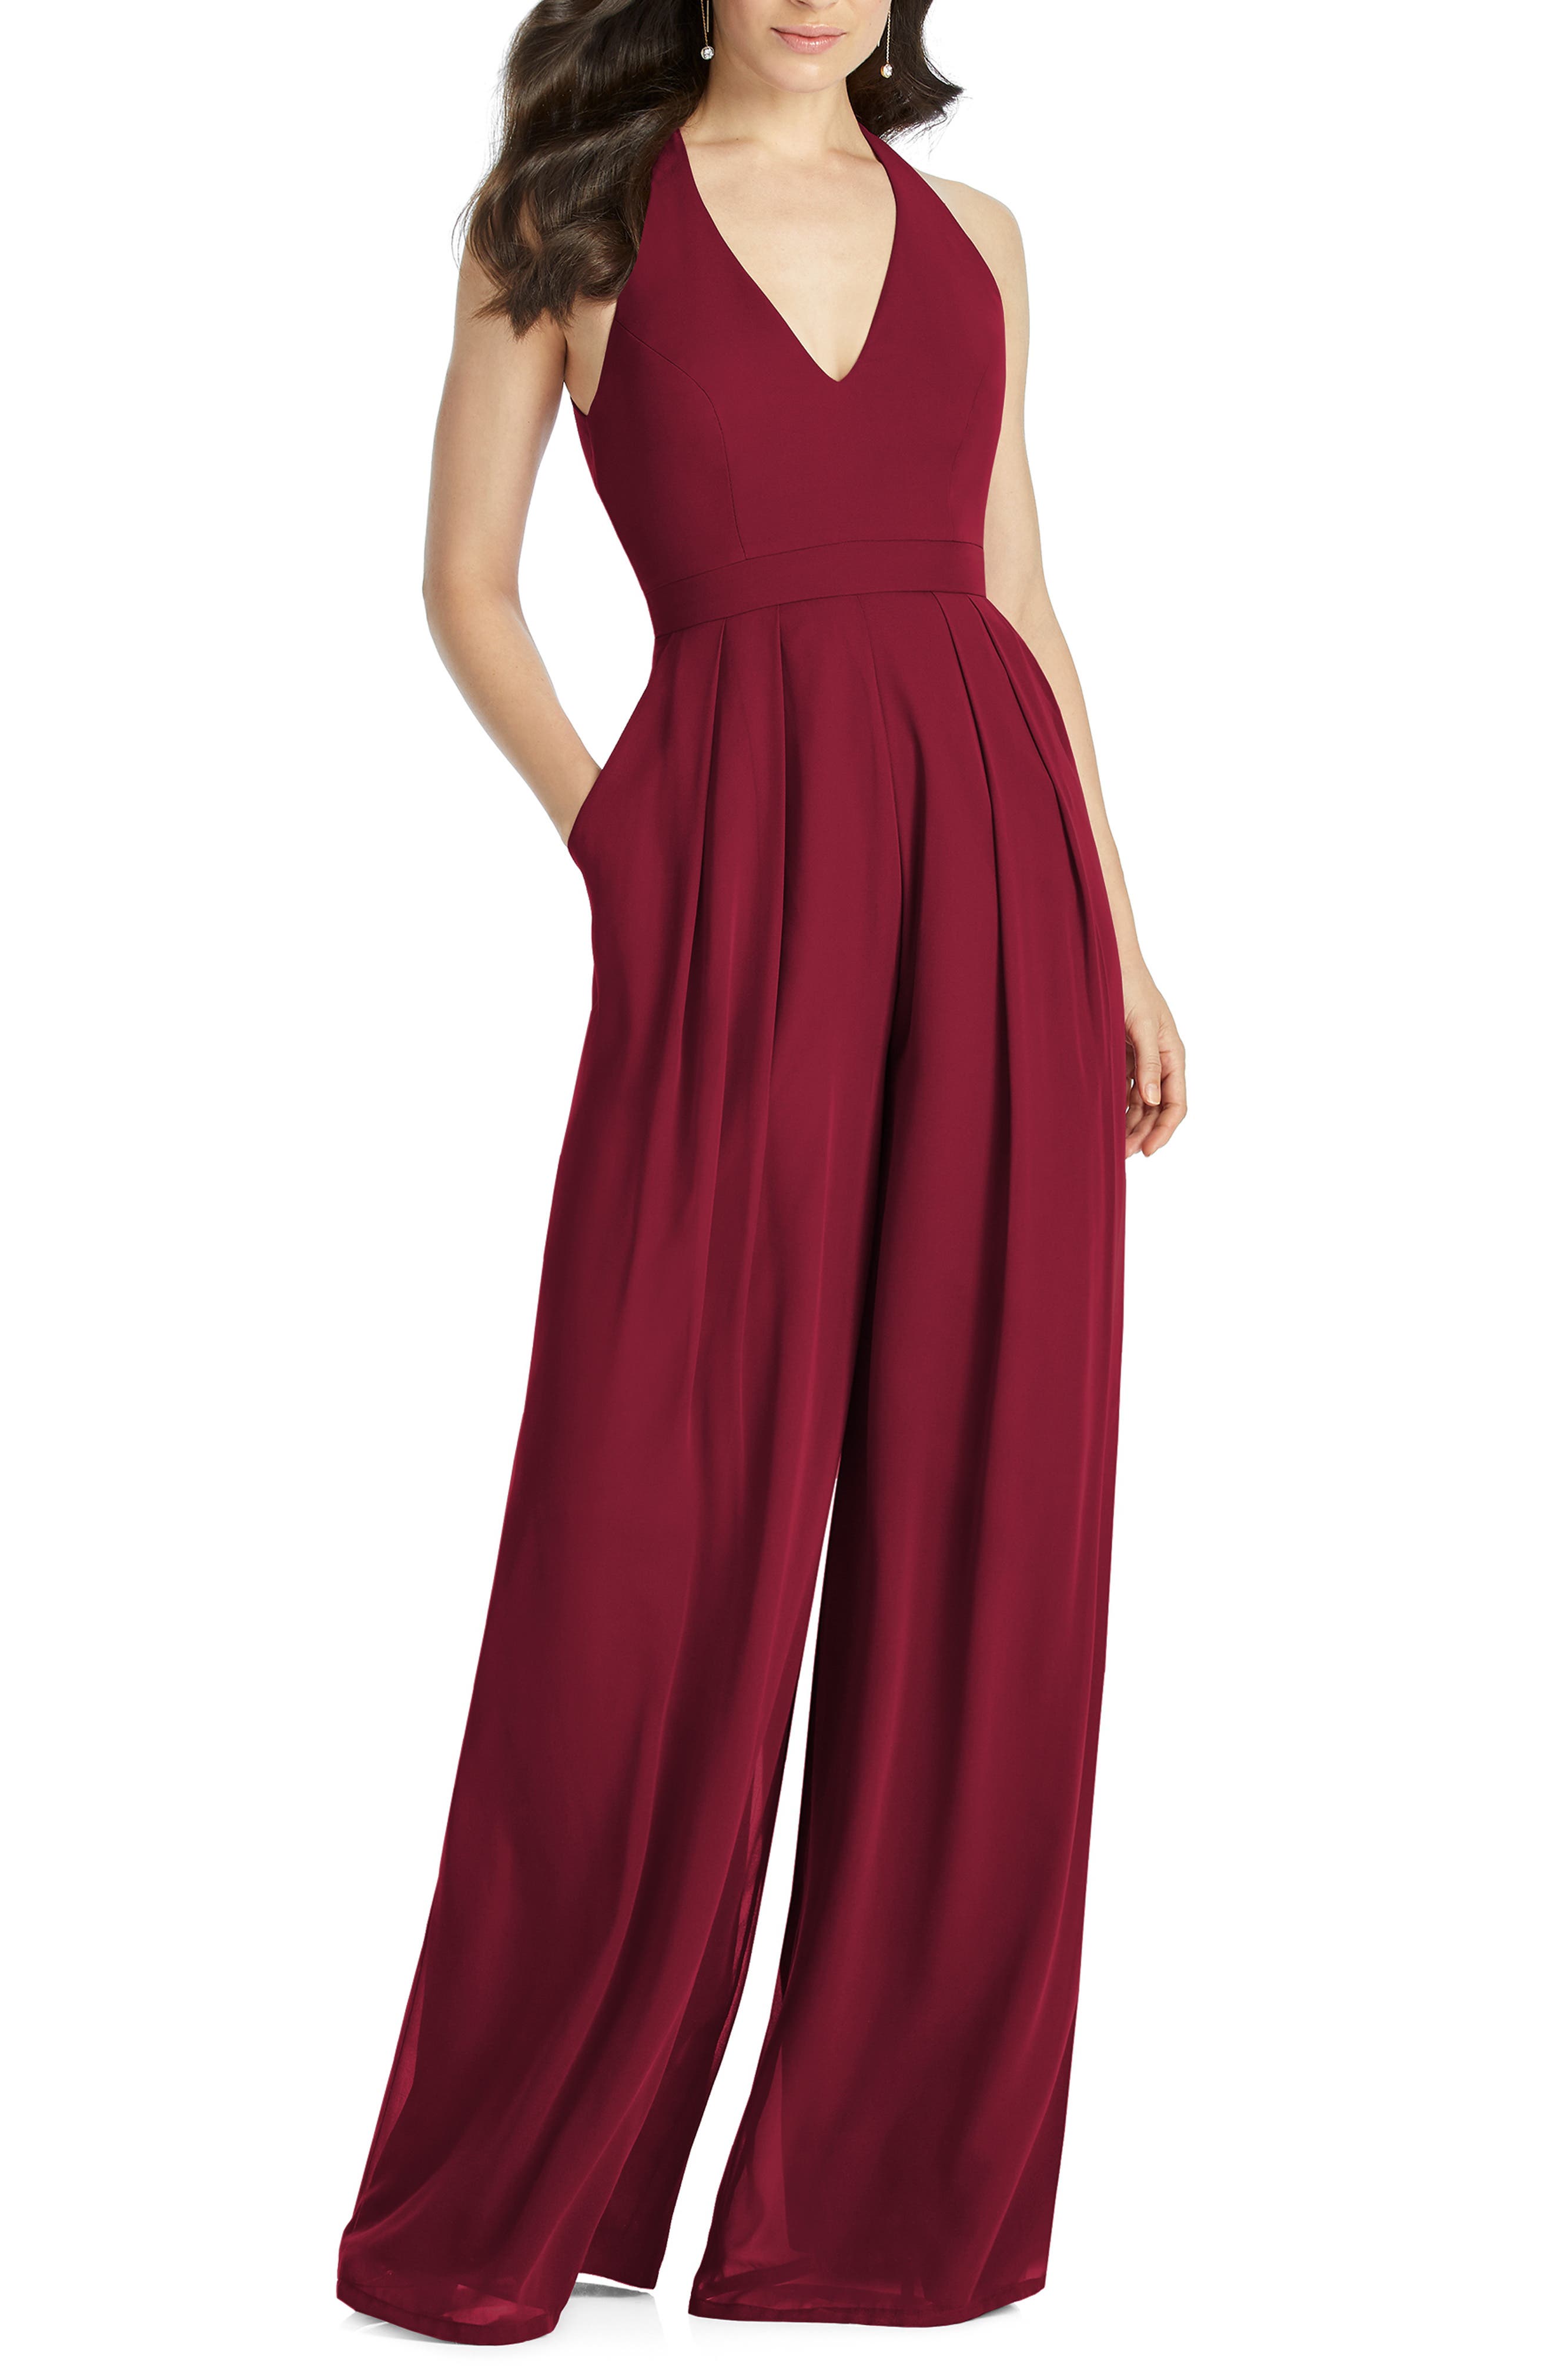 jumpsuits for homecoming